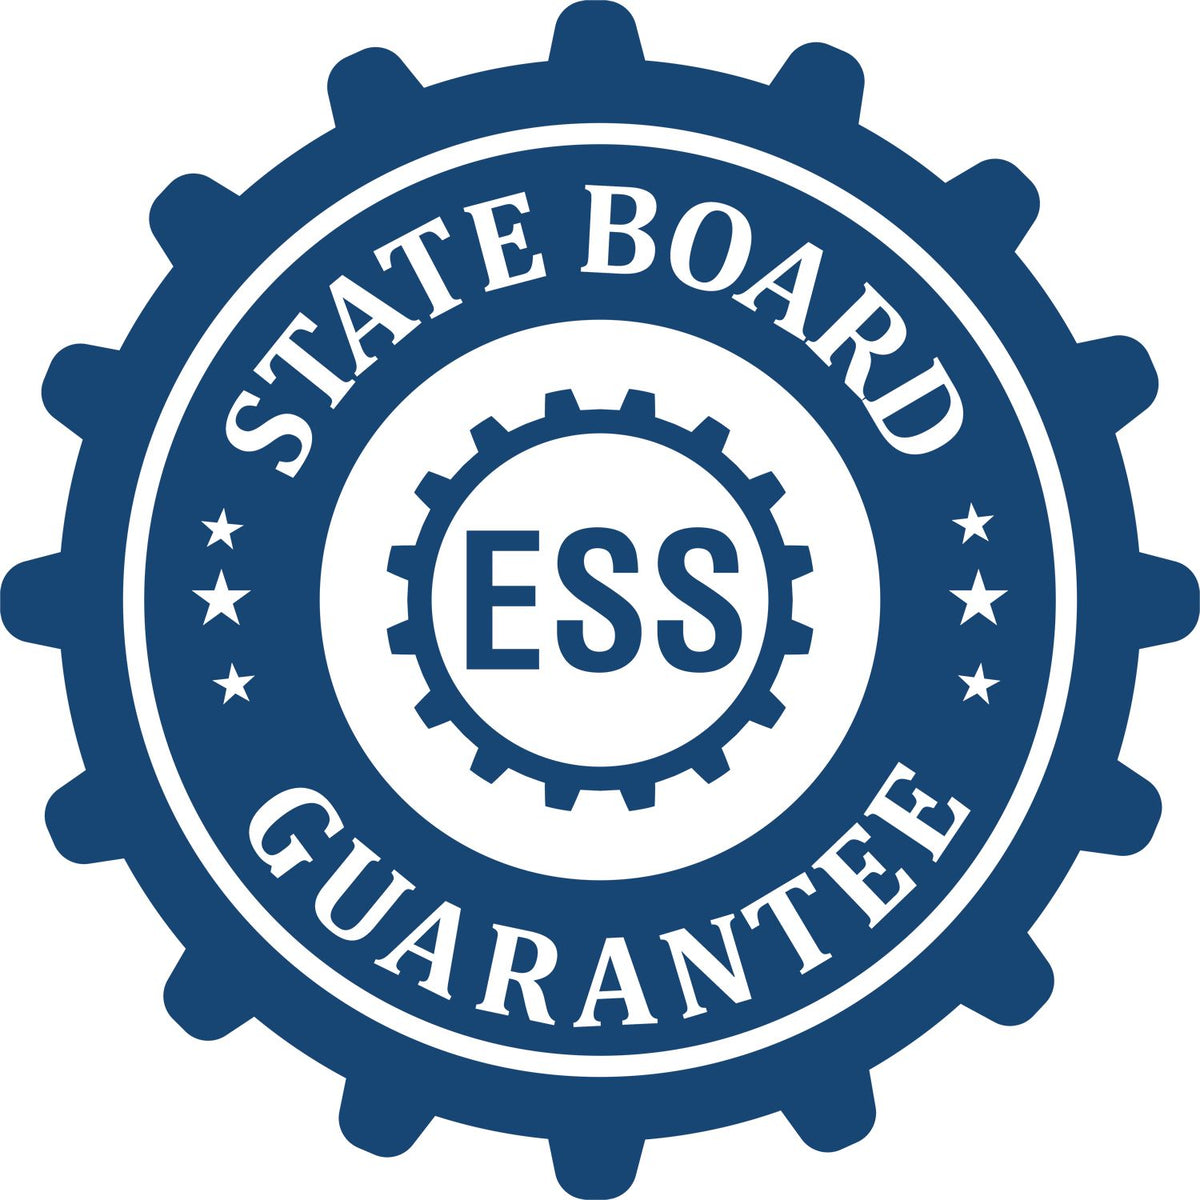 An emblem in a gear shape illustrating a state board guarantee for the Heavy Duty Cast Iron Alaska Geologist Seal Embosser